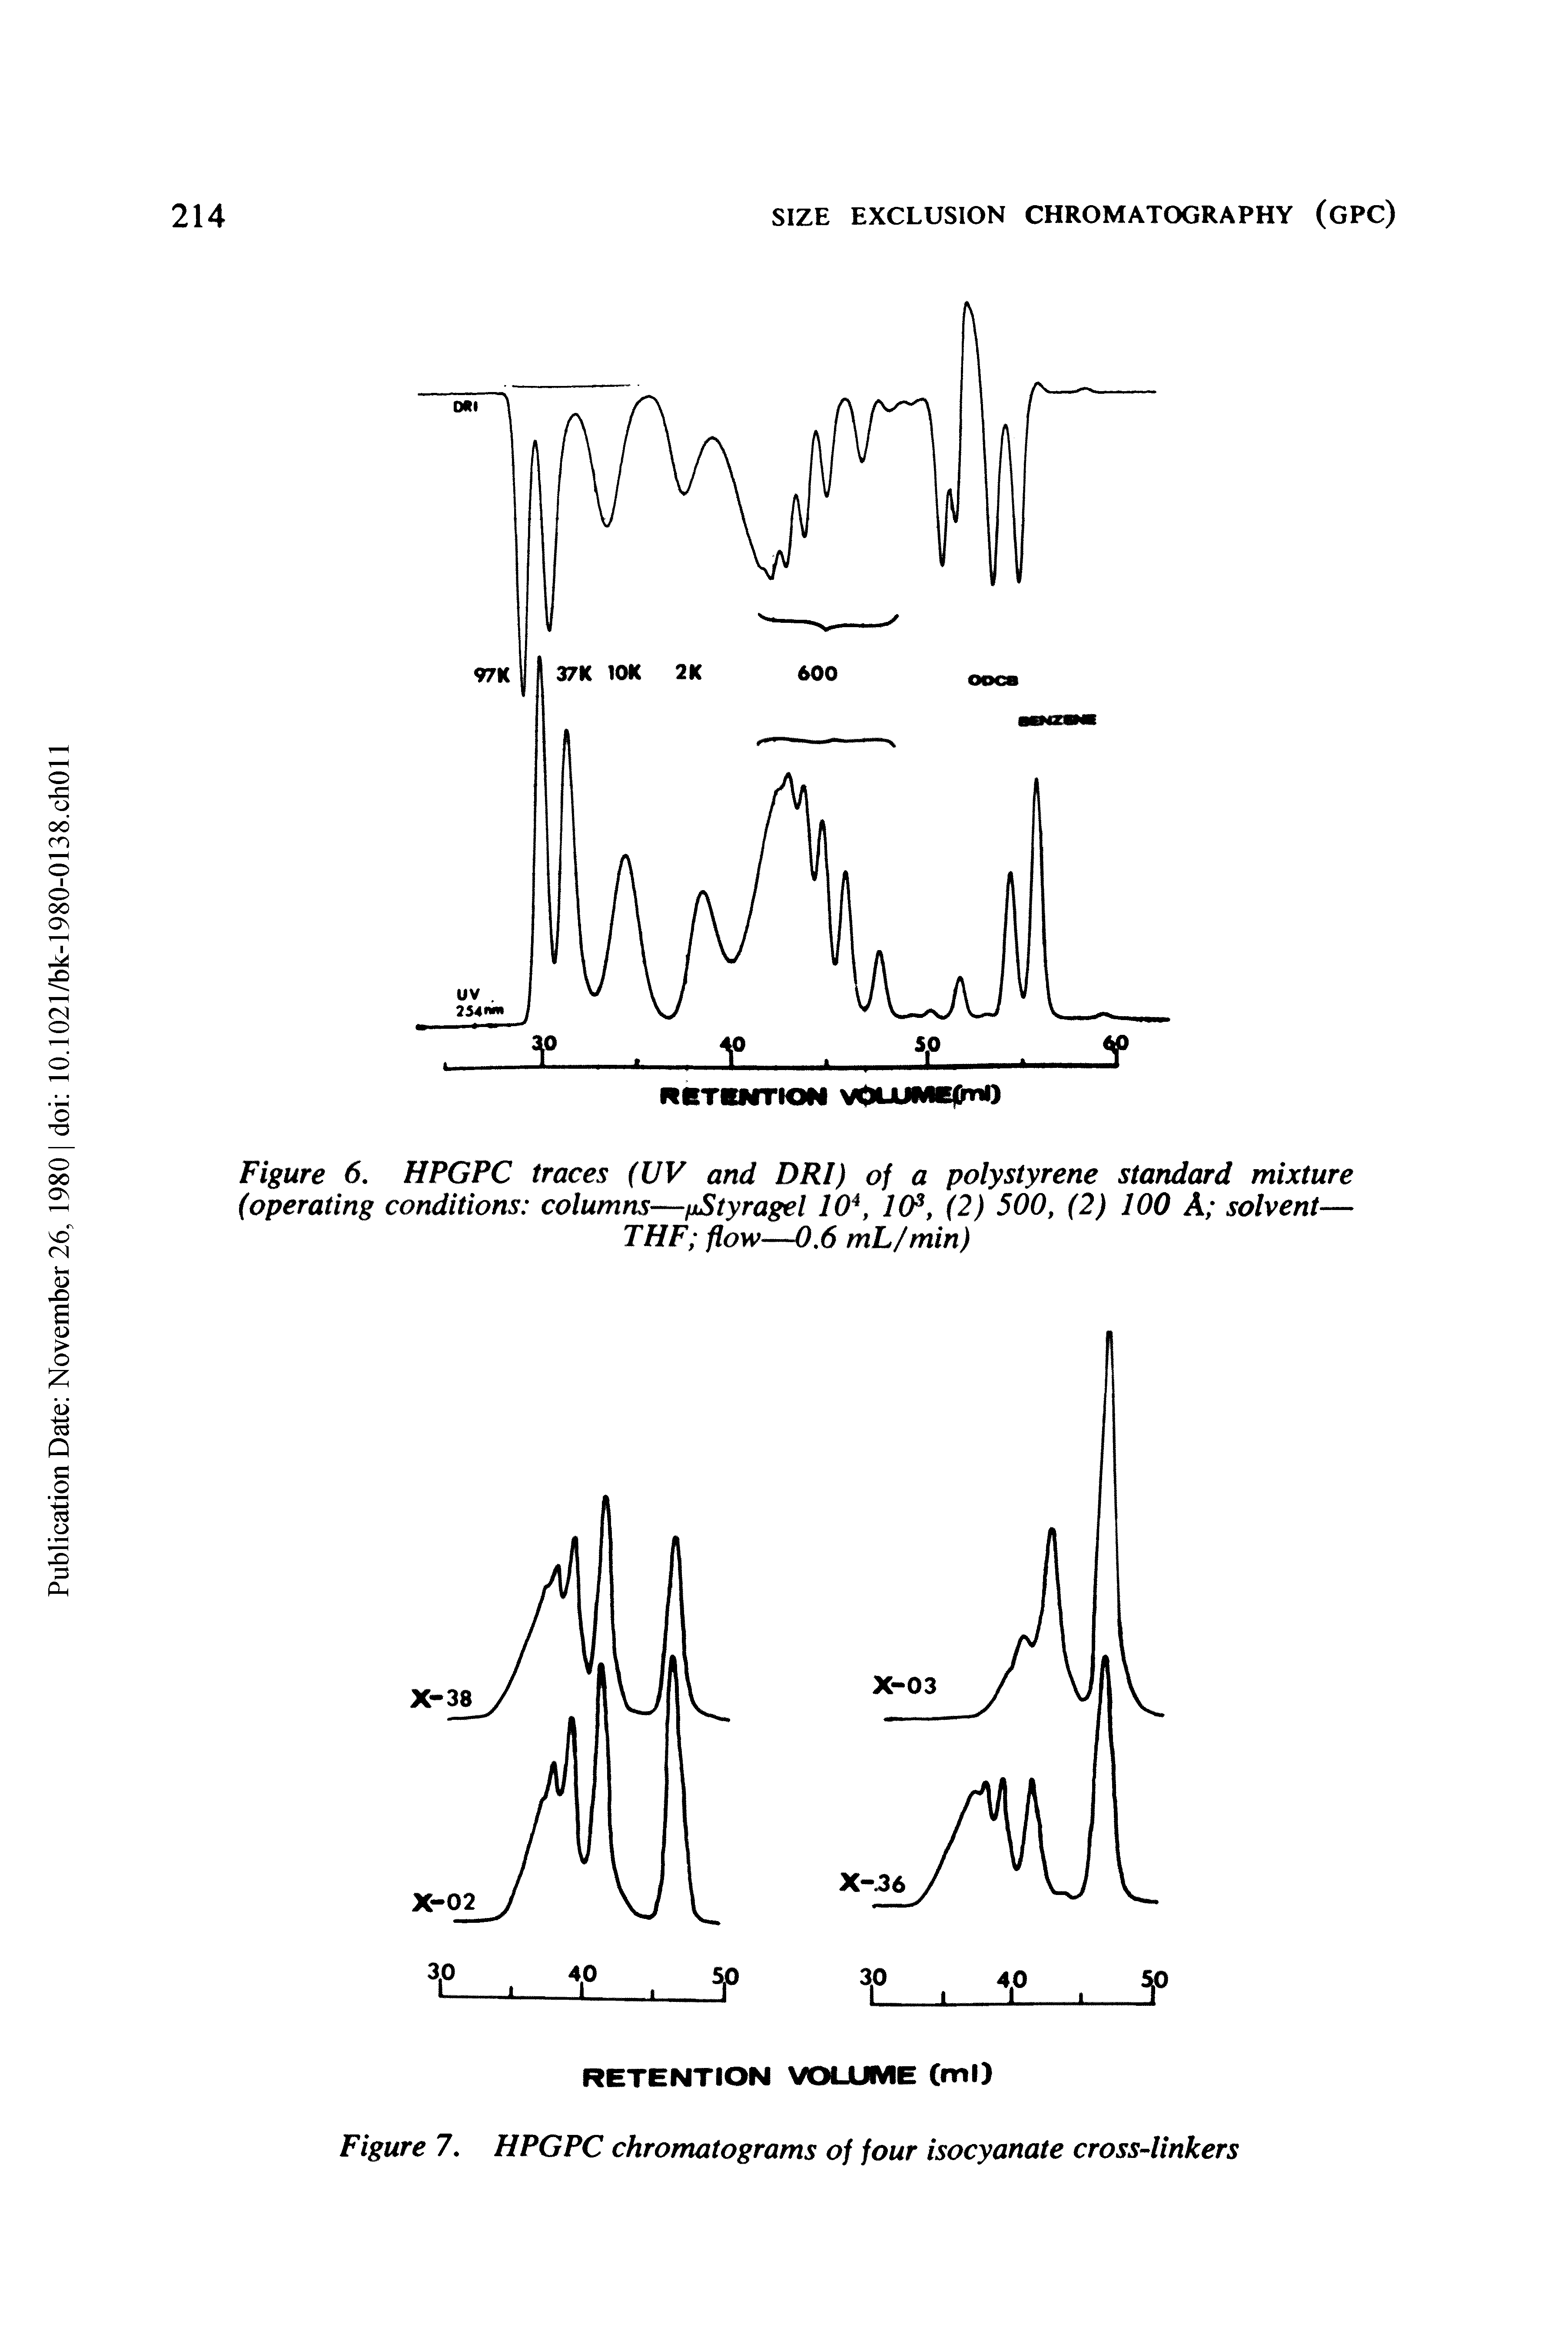 Figure 7. HPGPC chromatograms of four isocyanate cross-linkers...